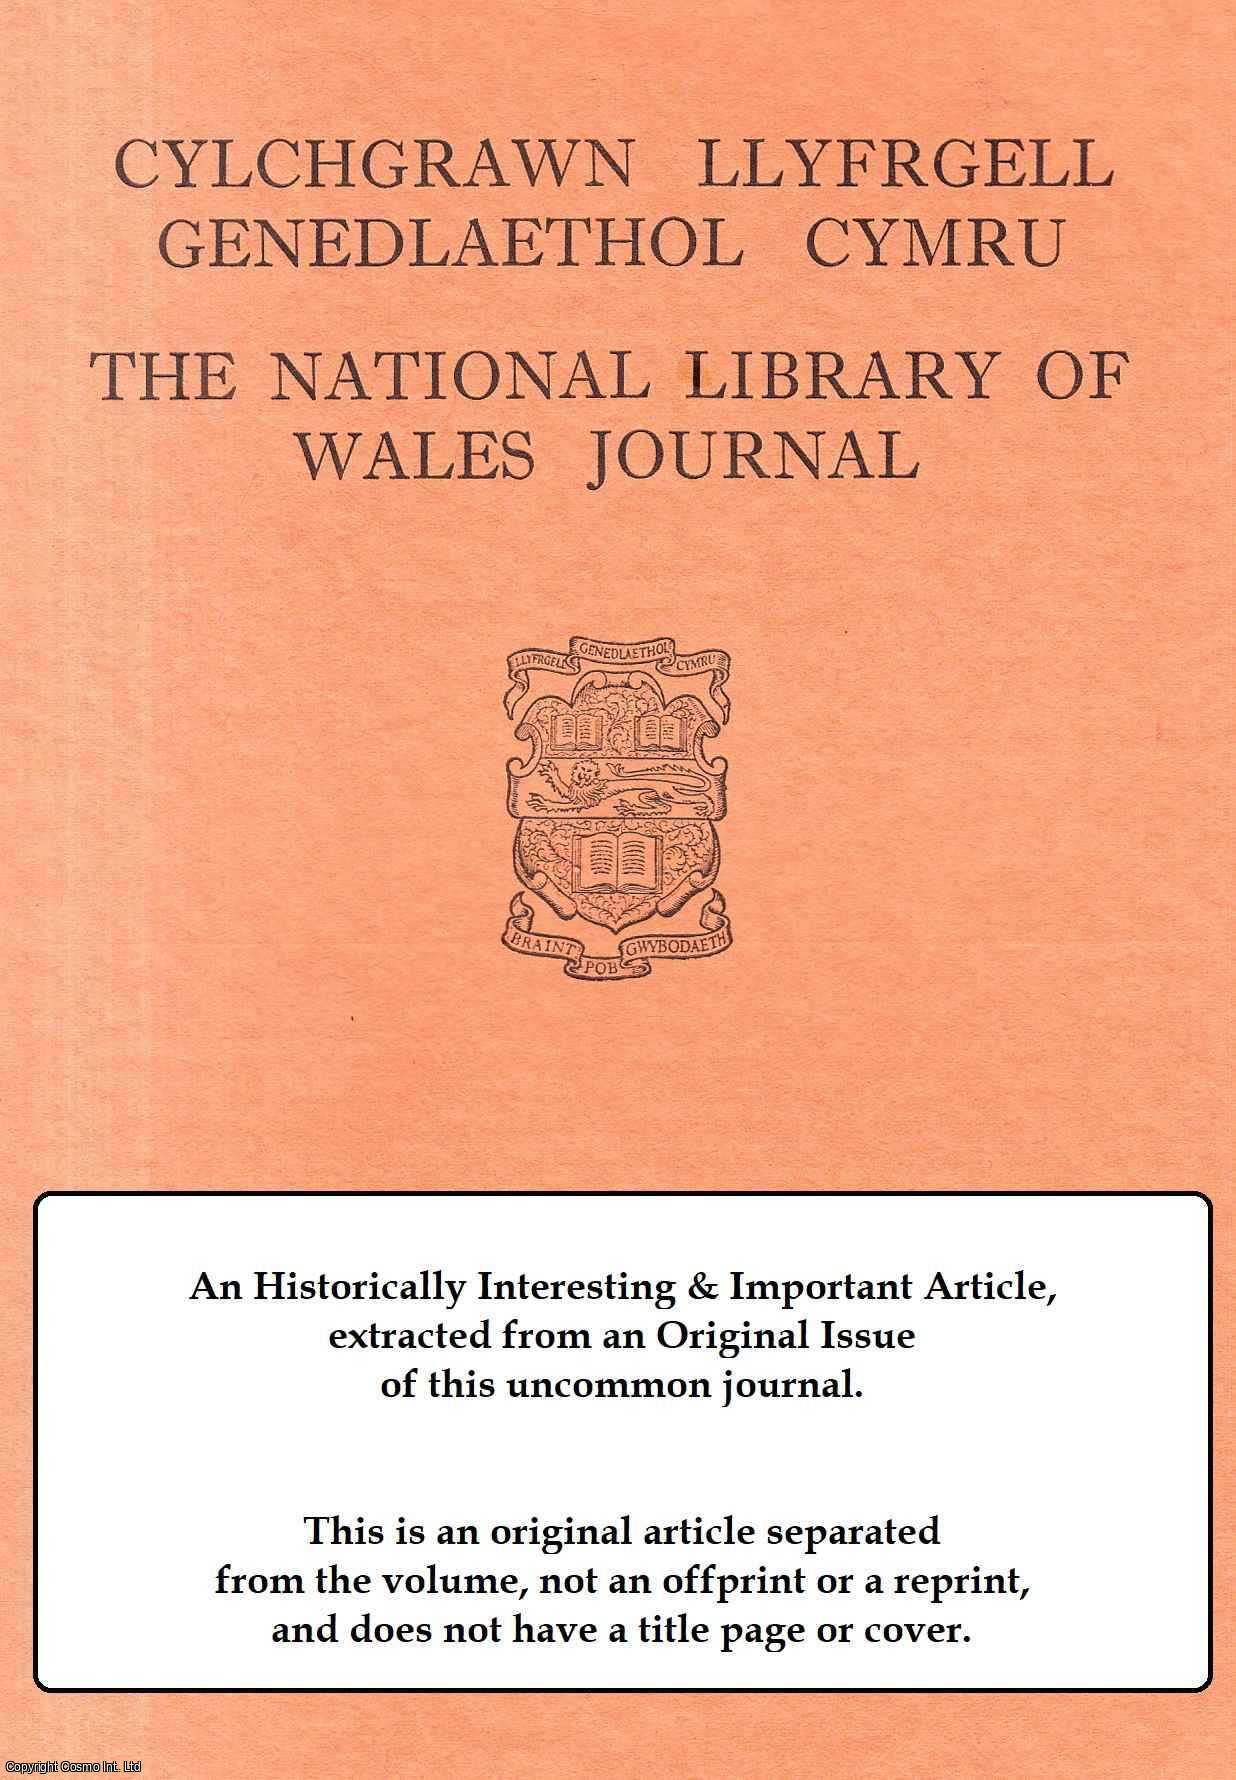 D. Parry-Jones - Some Thoughts and Notes on The English of South Wales. An original article from The National Library of Wales Journal, 1974.